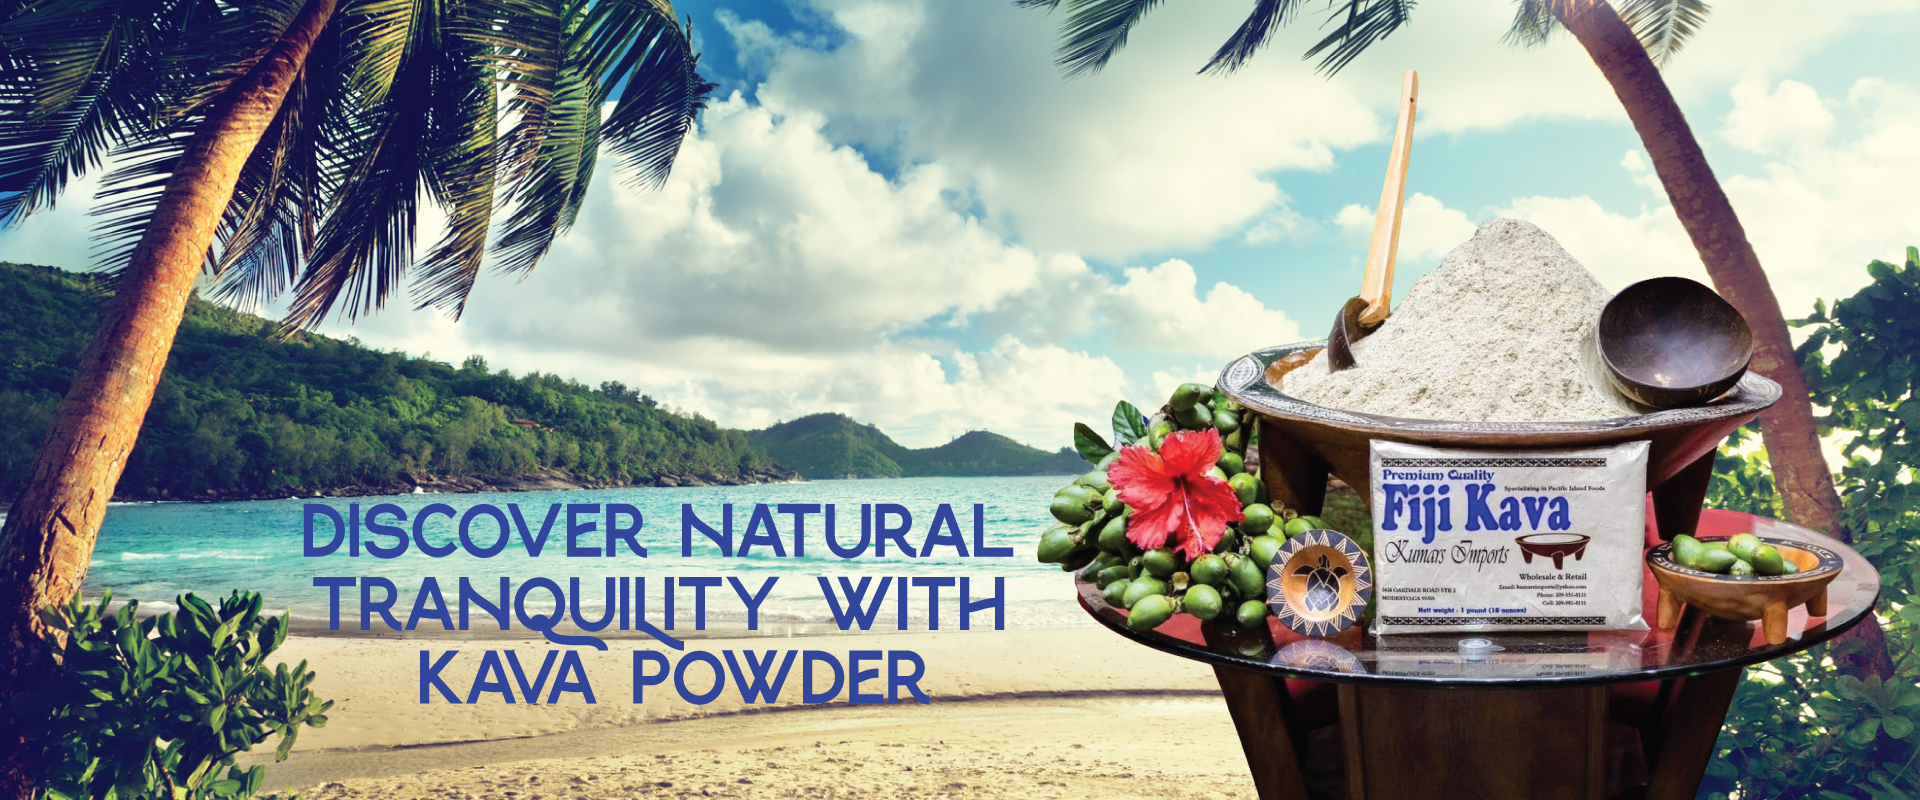 Discover Natural Tranquility with kava power